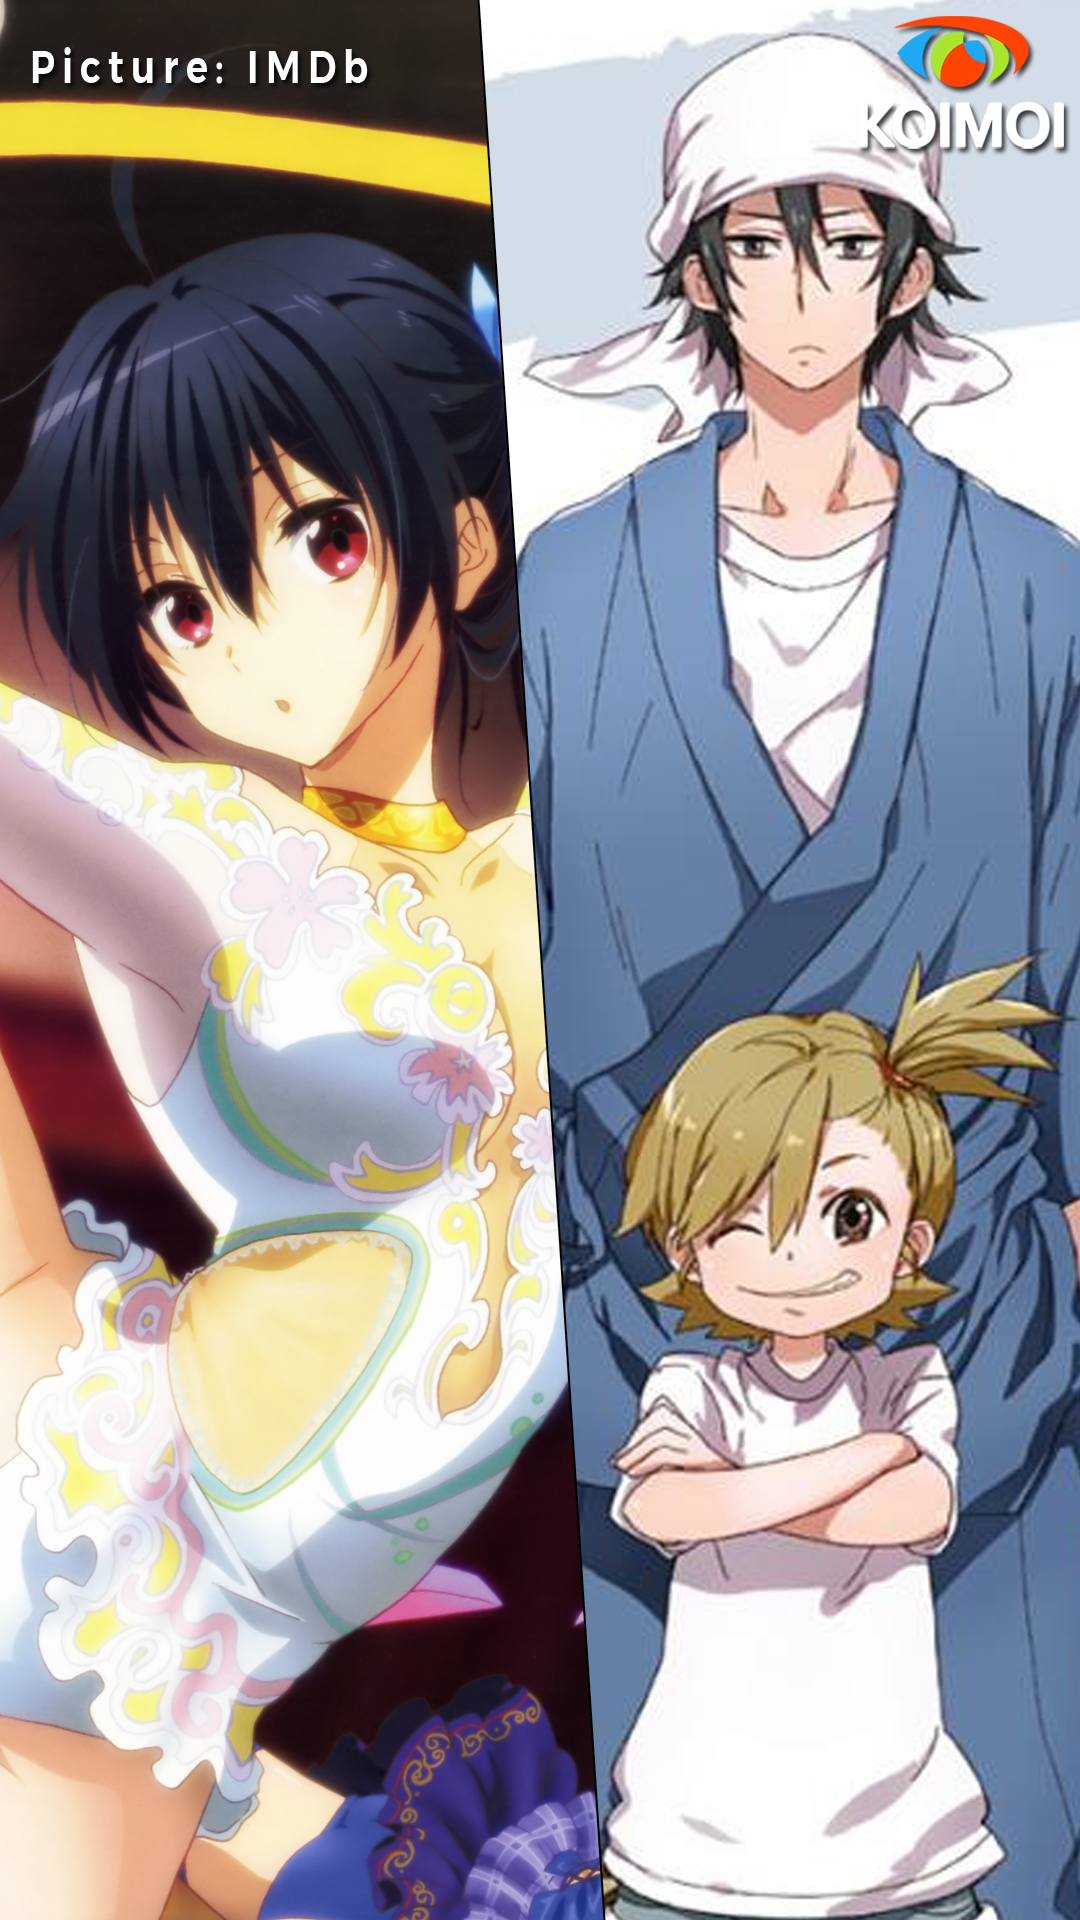 Cute Anime: 17 Cute Series You Can Watch Online